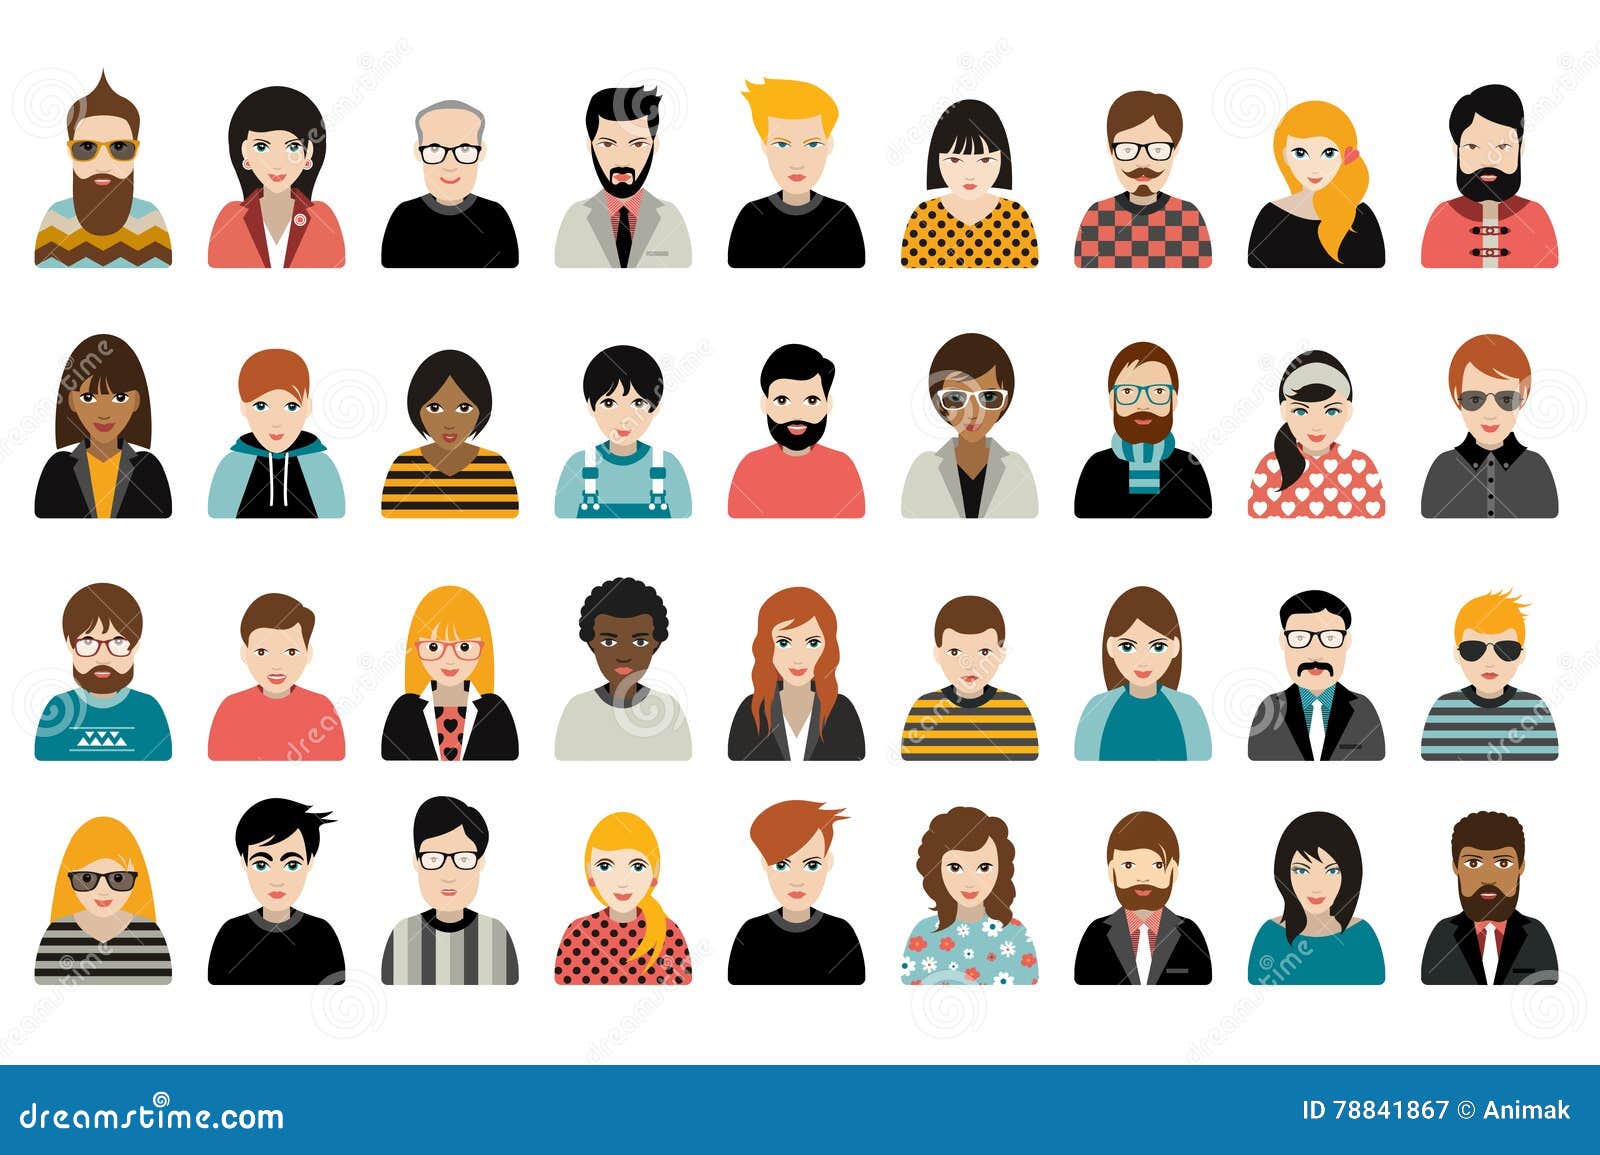 mega set of persons, avatars, people heads different nationality in flat style.